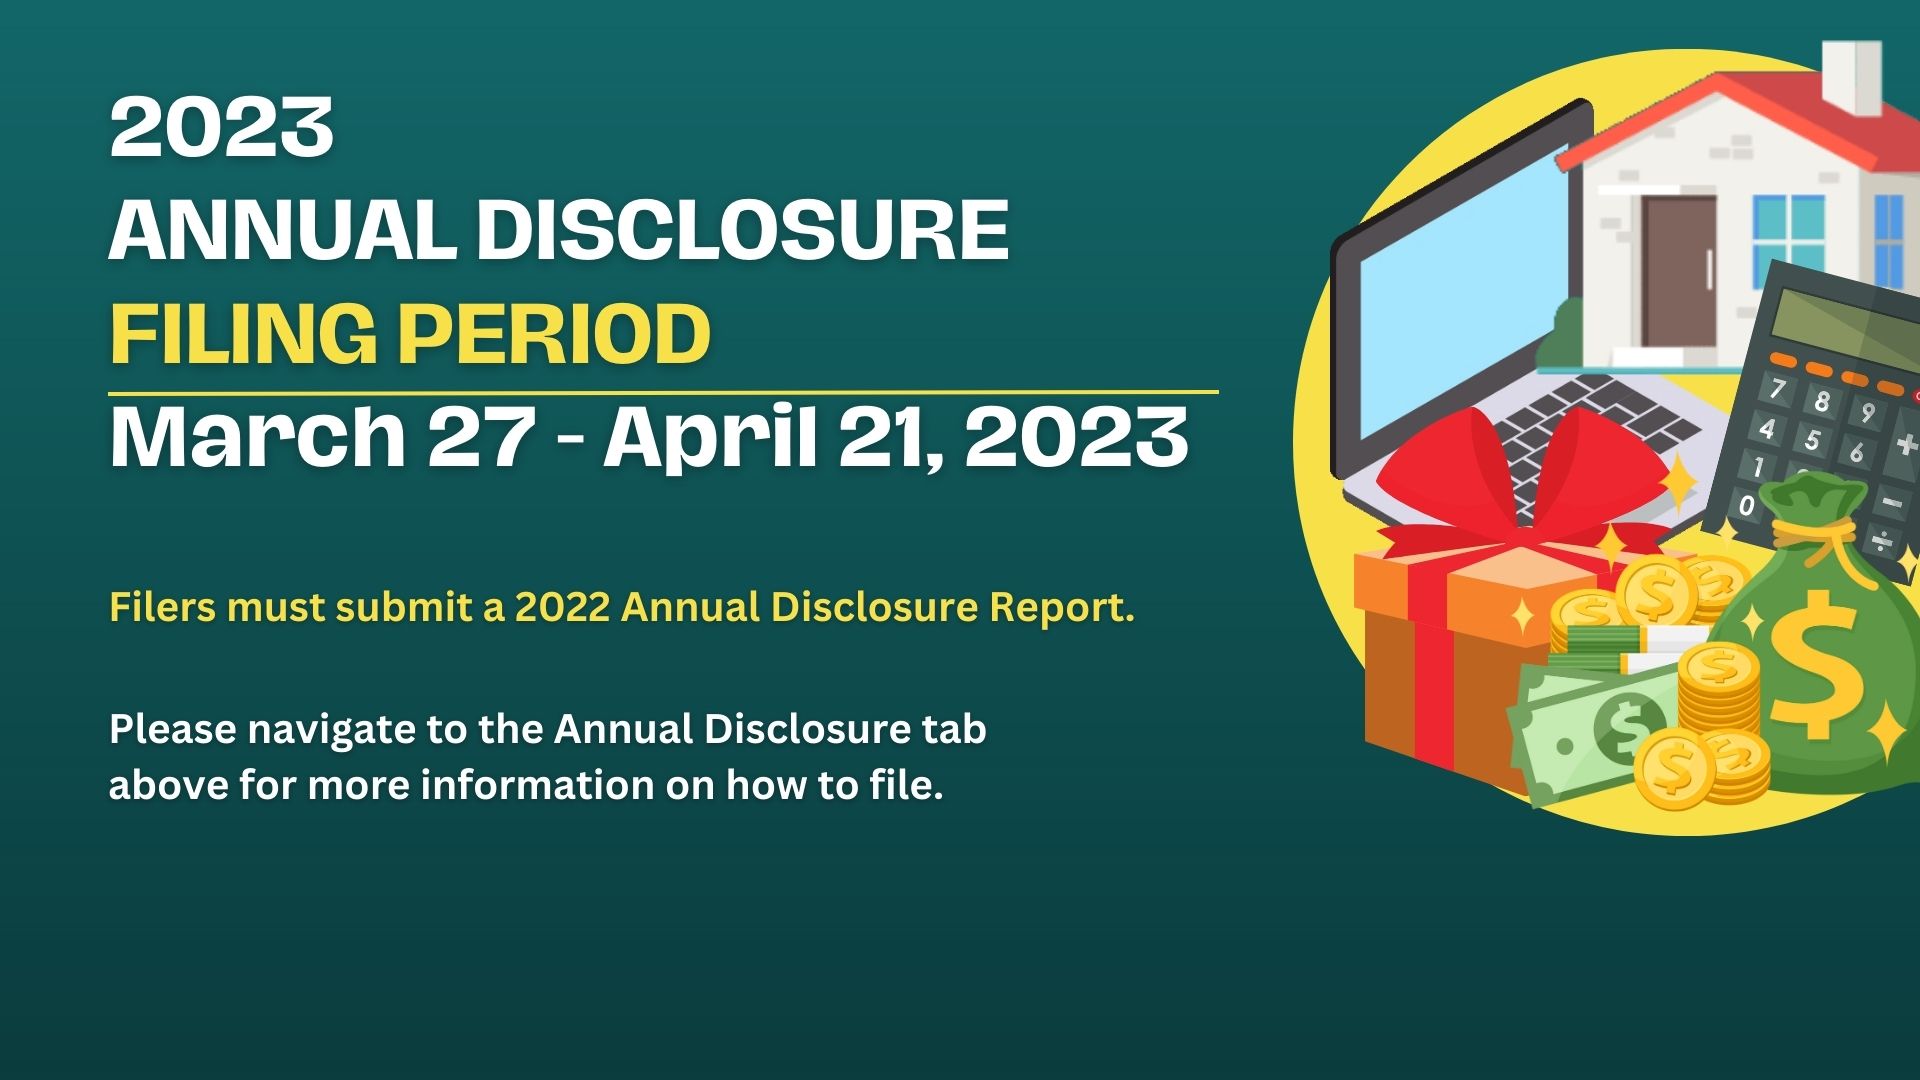 2023 Annual Disclosure filing period March 27 to April 21
                                           